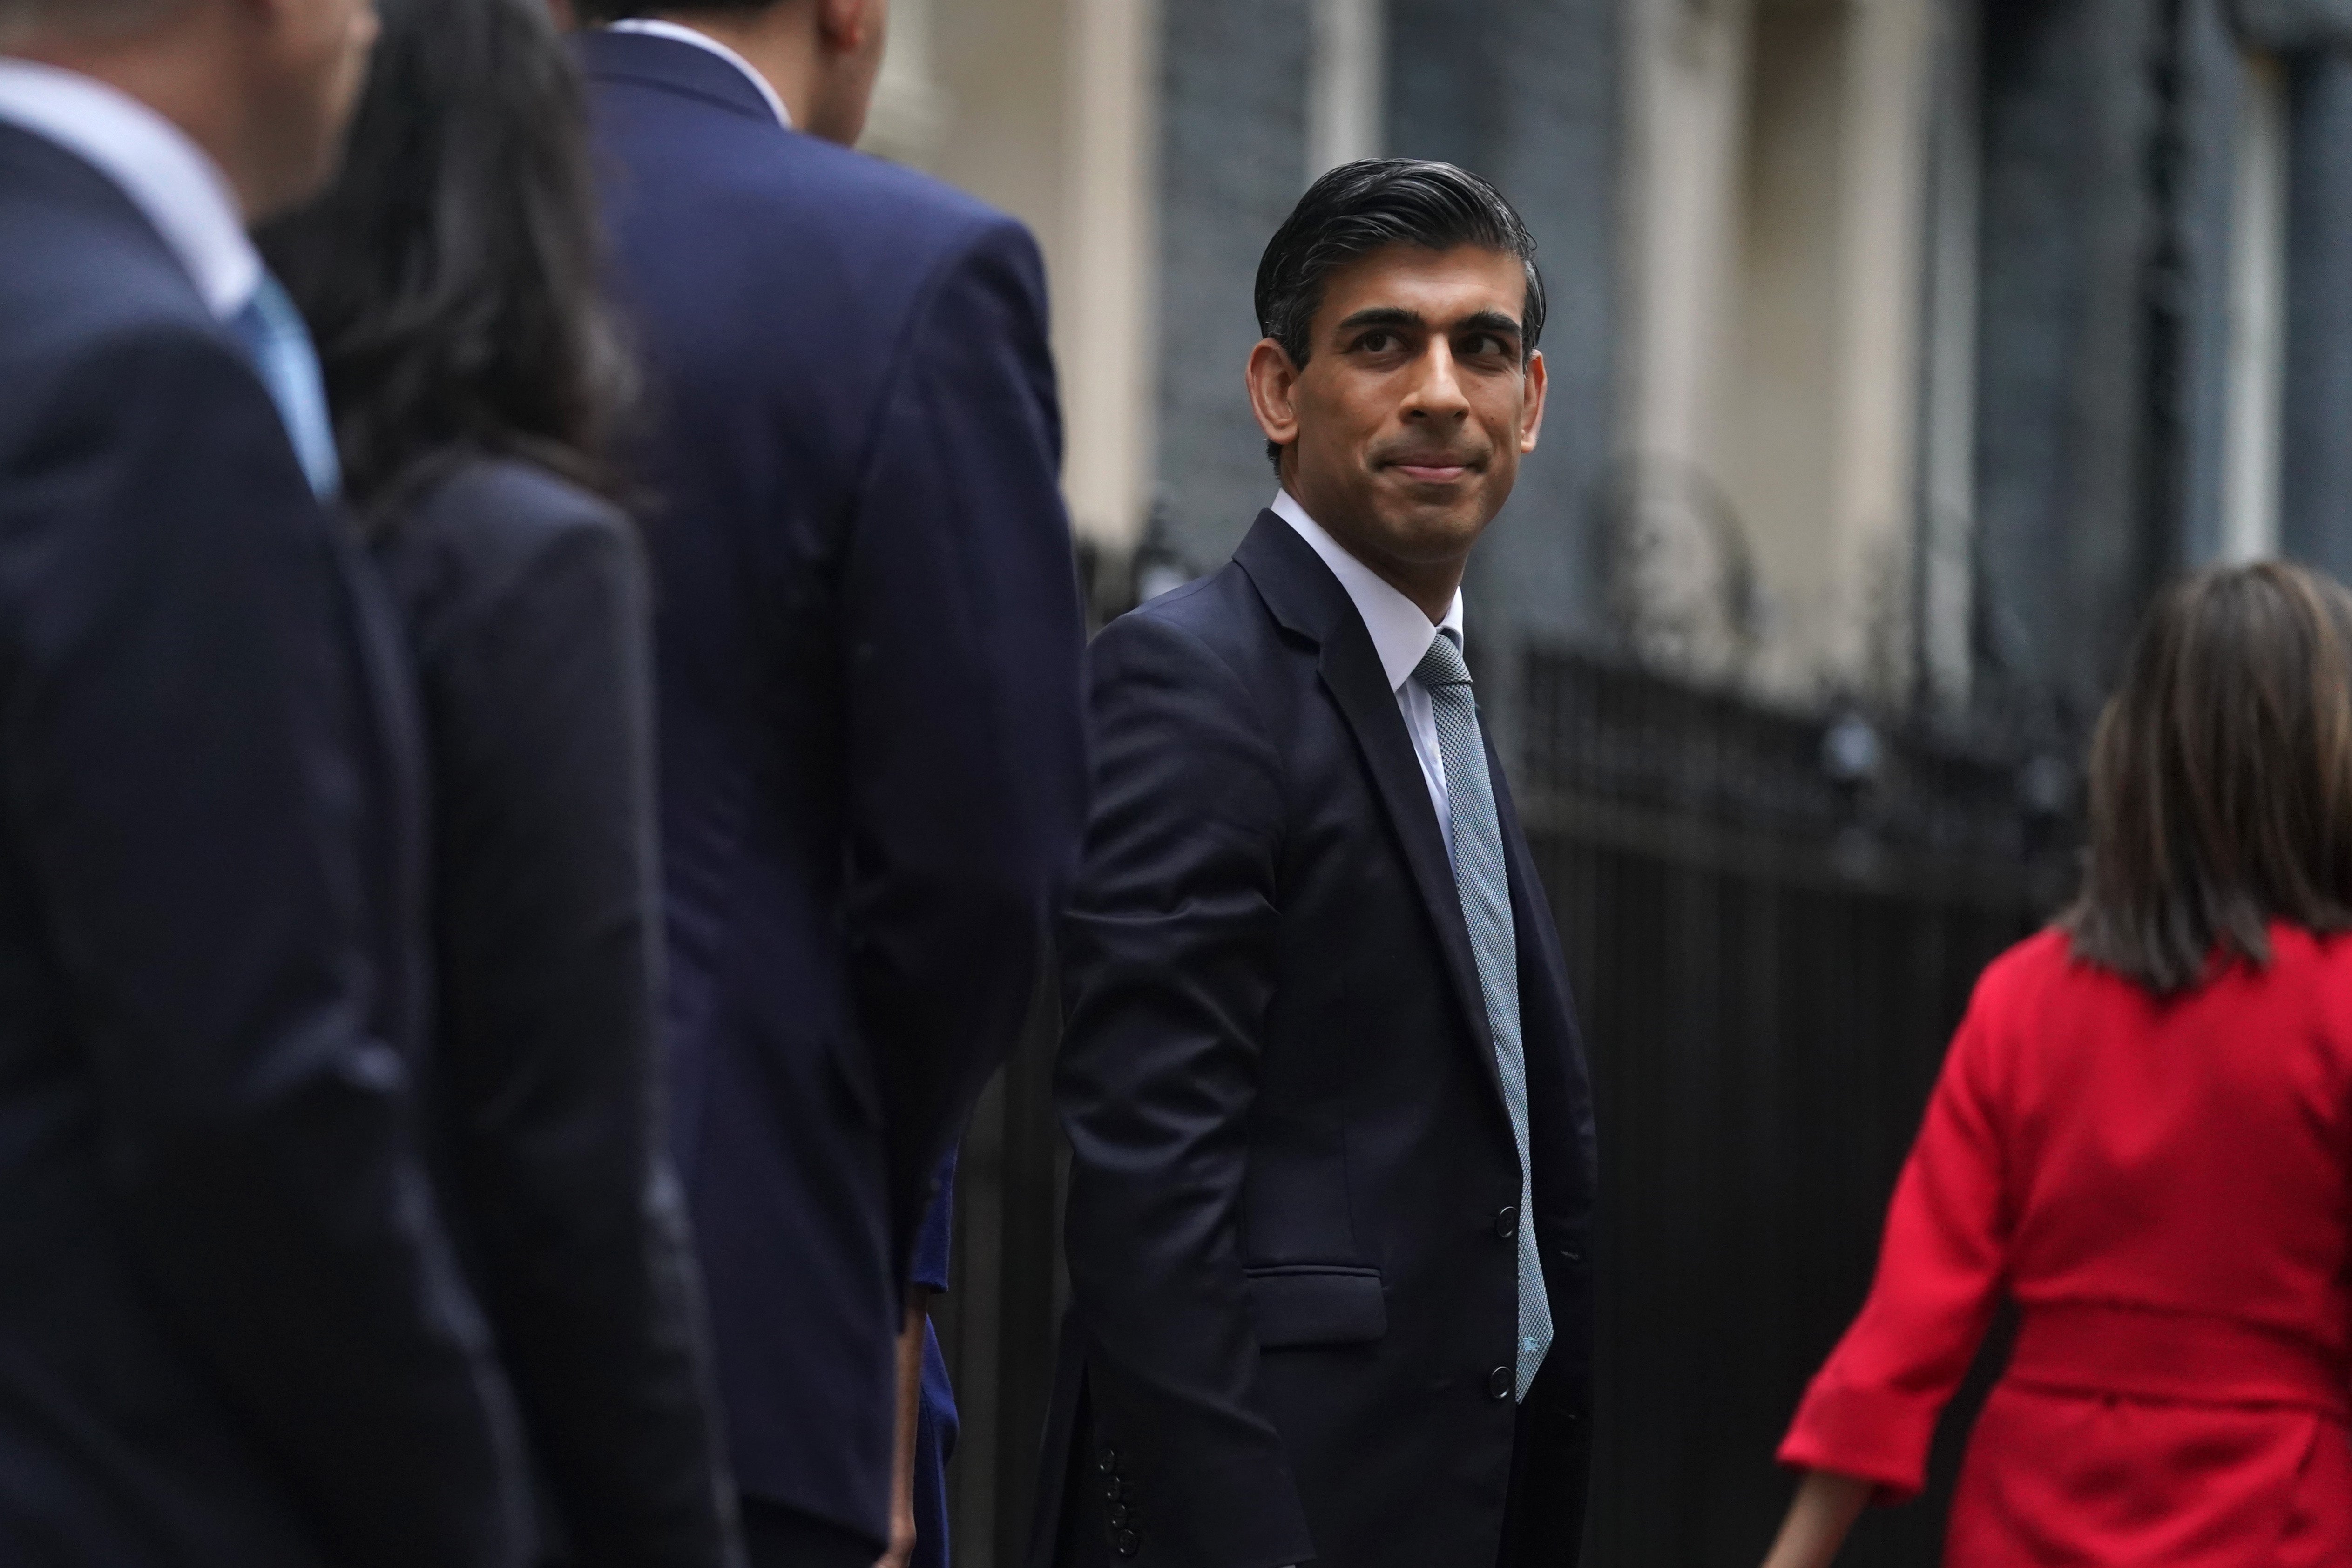 Chancellor of the Exchequer Rishi Sunak has said that a rate rise could add billions to the state’s debt mountain (Victoria Jones/PA)